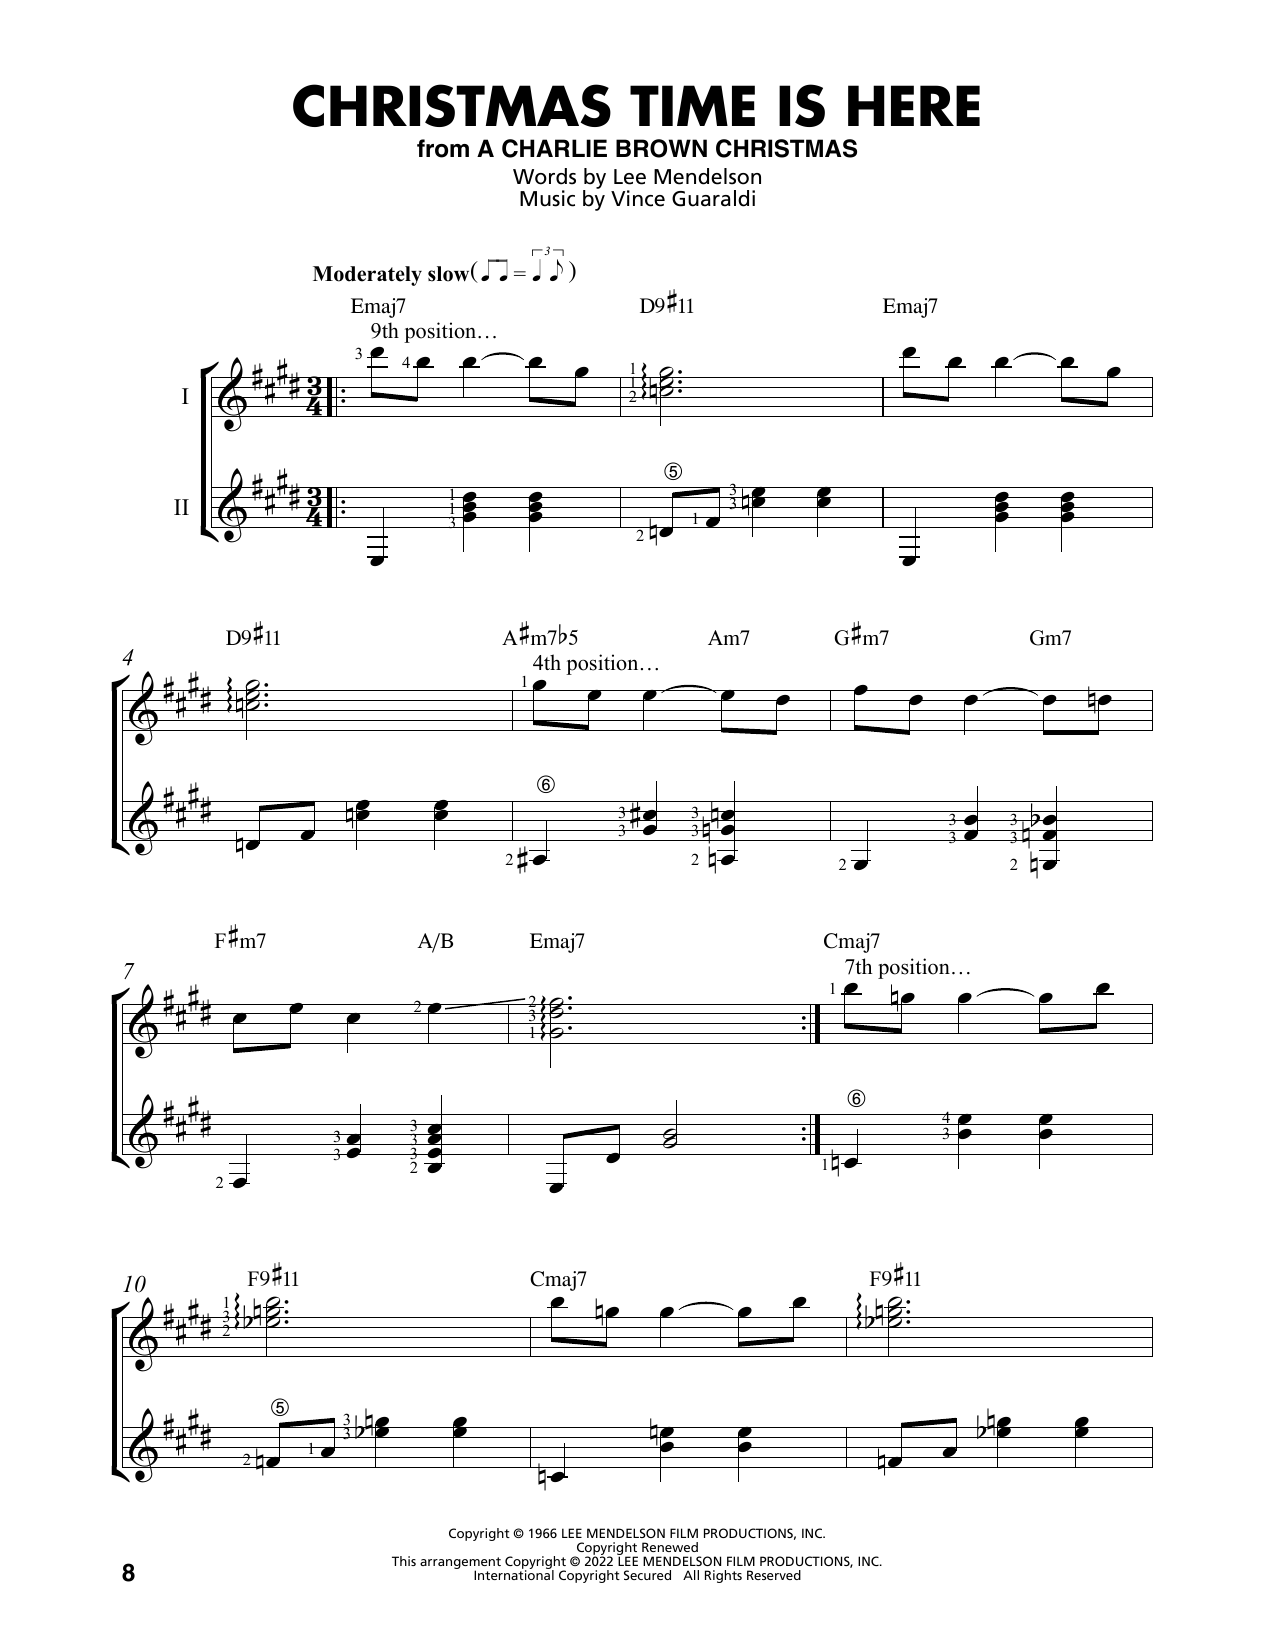 Download Vince Guaraldi Christmas Time Is Here (from A Charlie Sheet Music